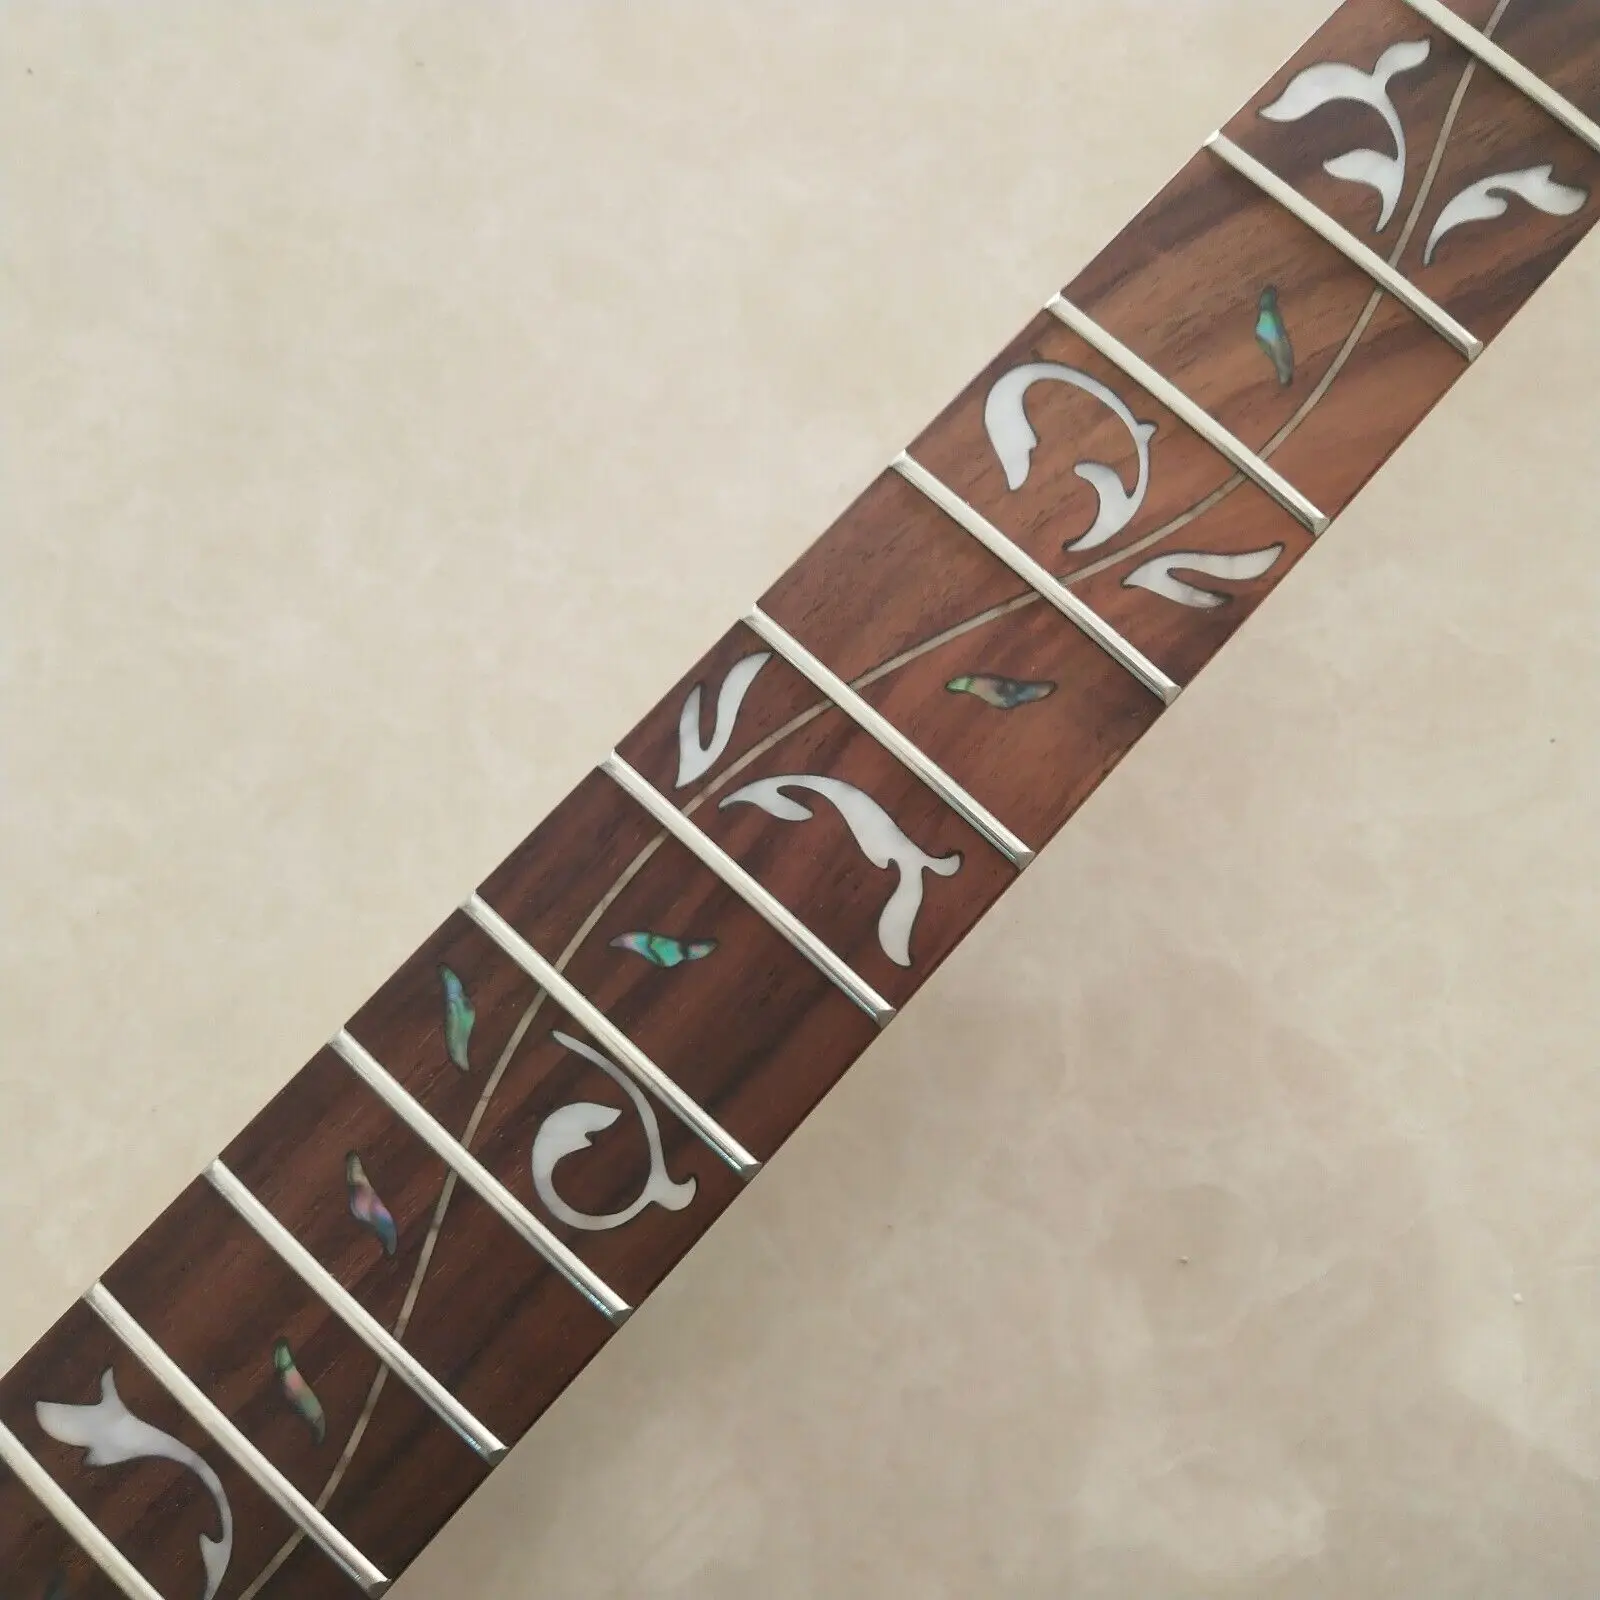 Ibanez Electric Guitar Neck Replacement 24 Fret Rosewood Fretboard Vine inlay enlarge